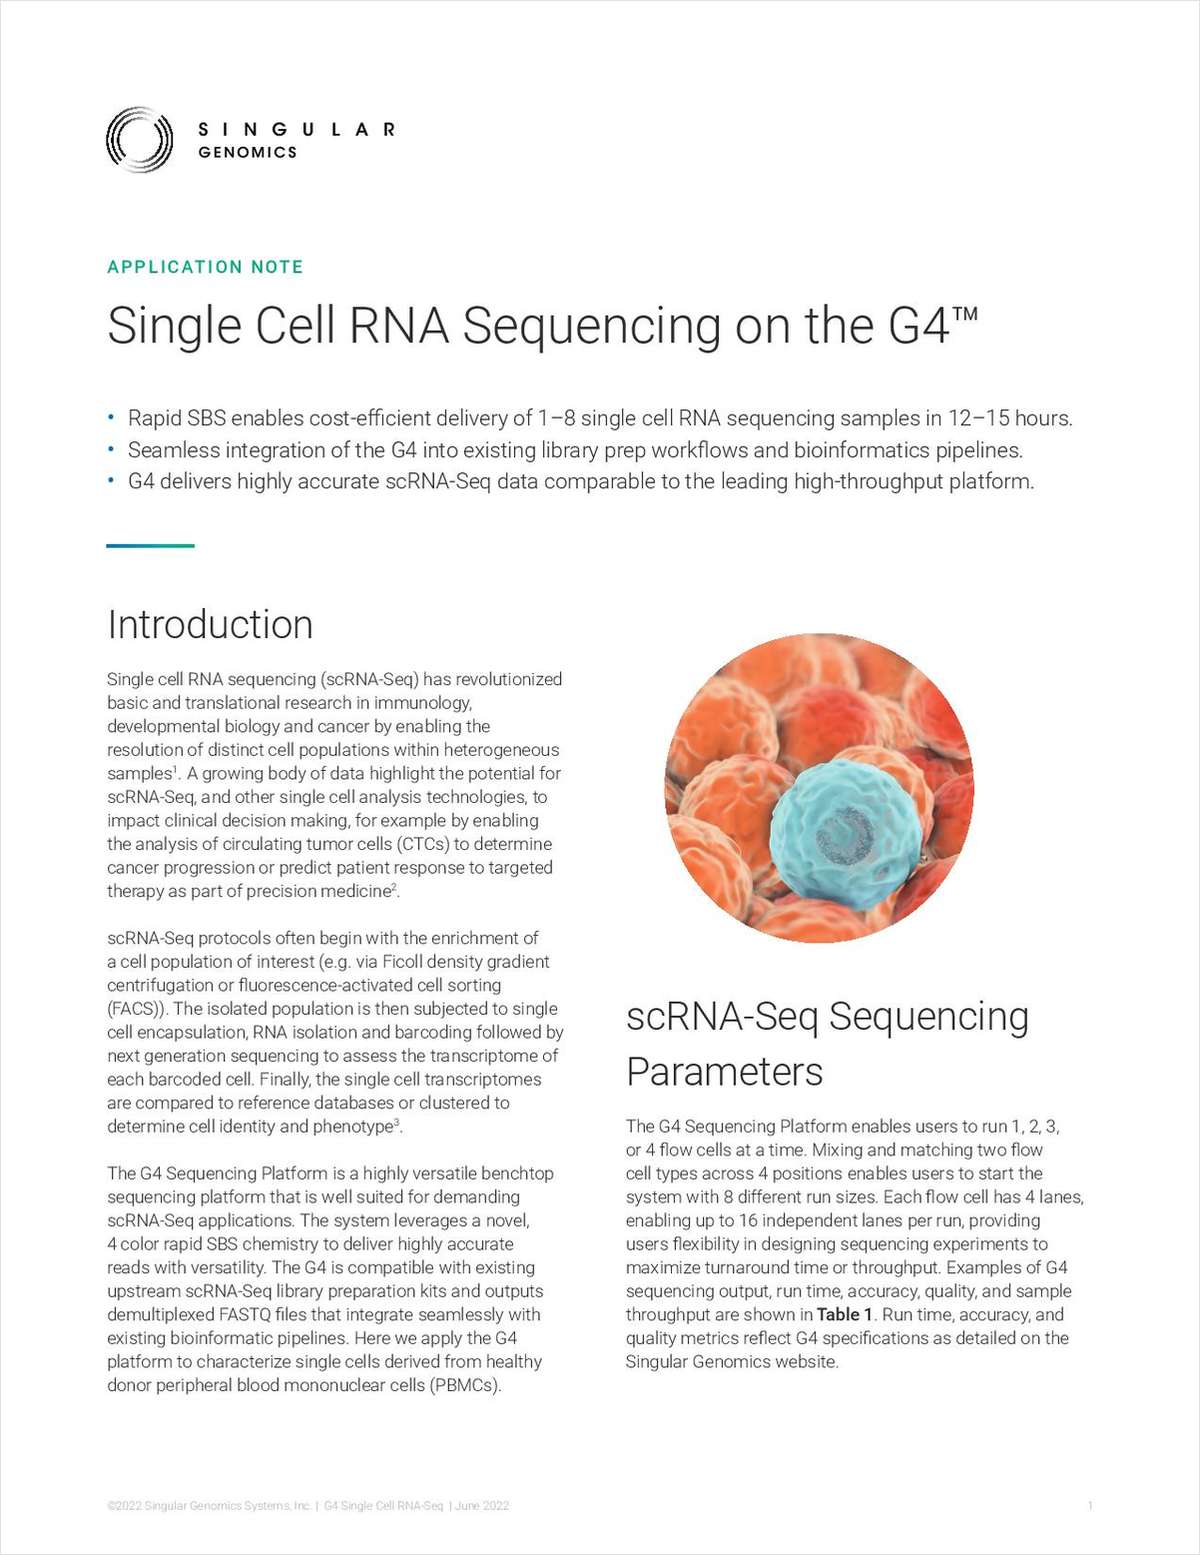 Single-Cell RNA Sequencing on the G4